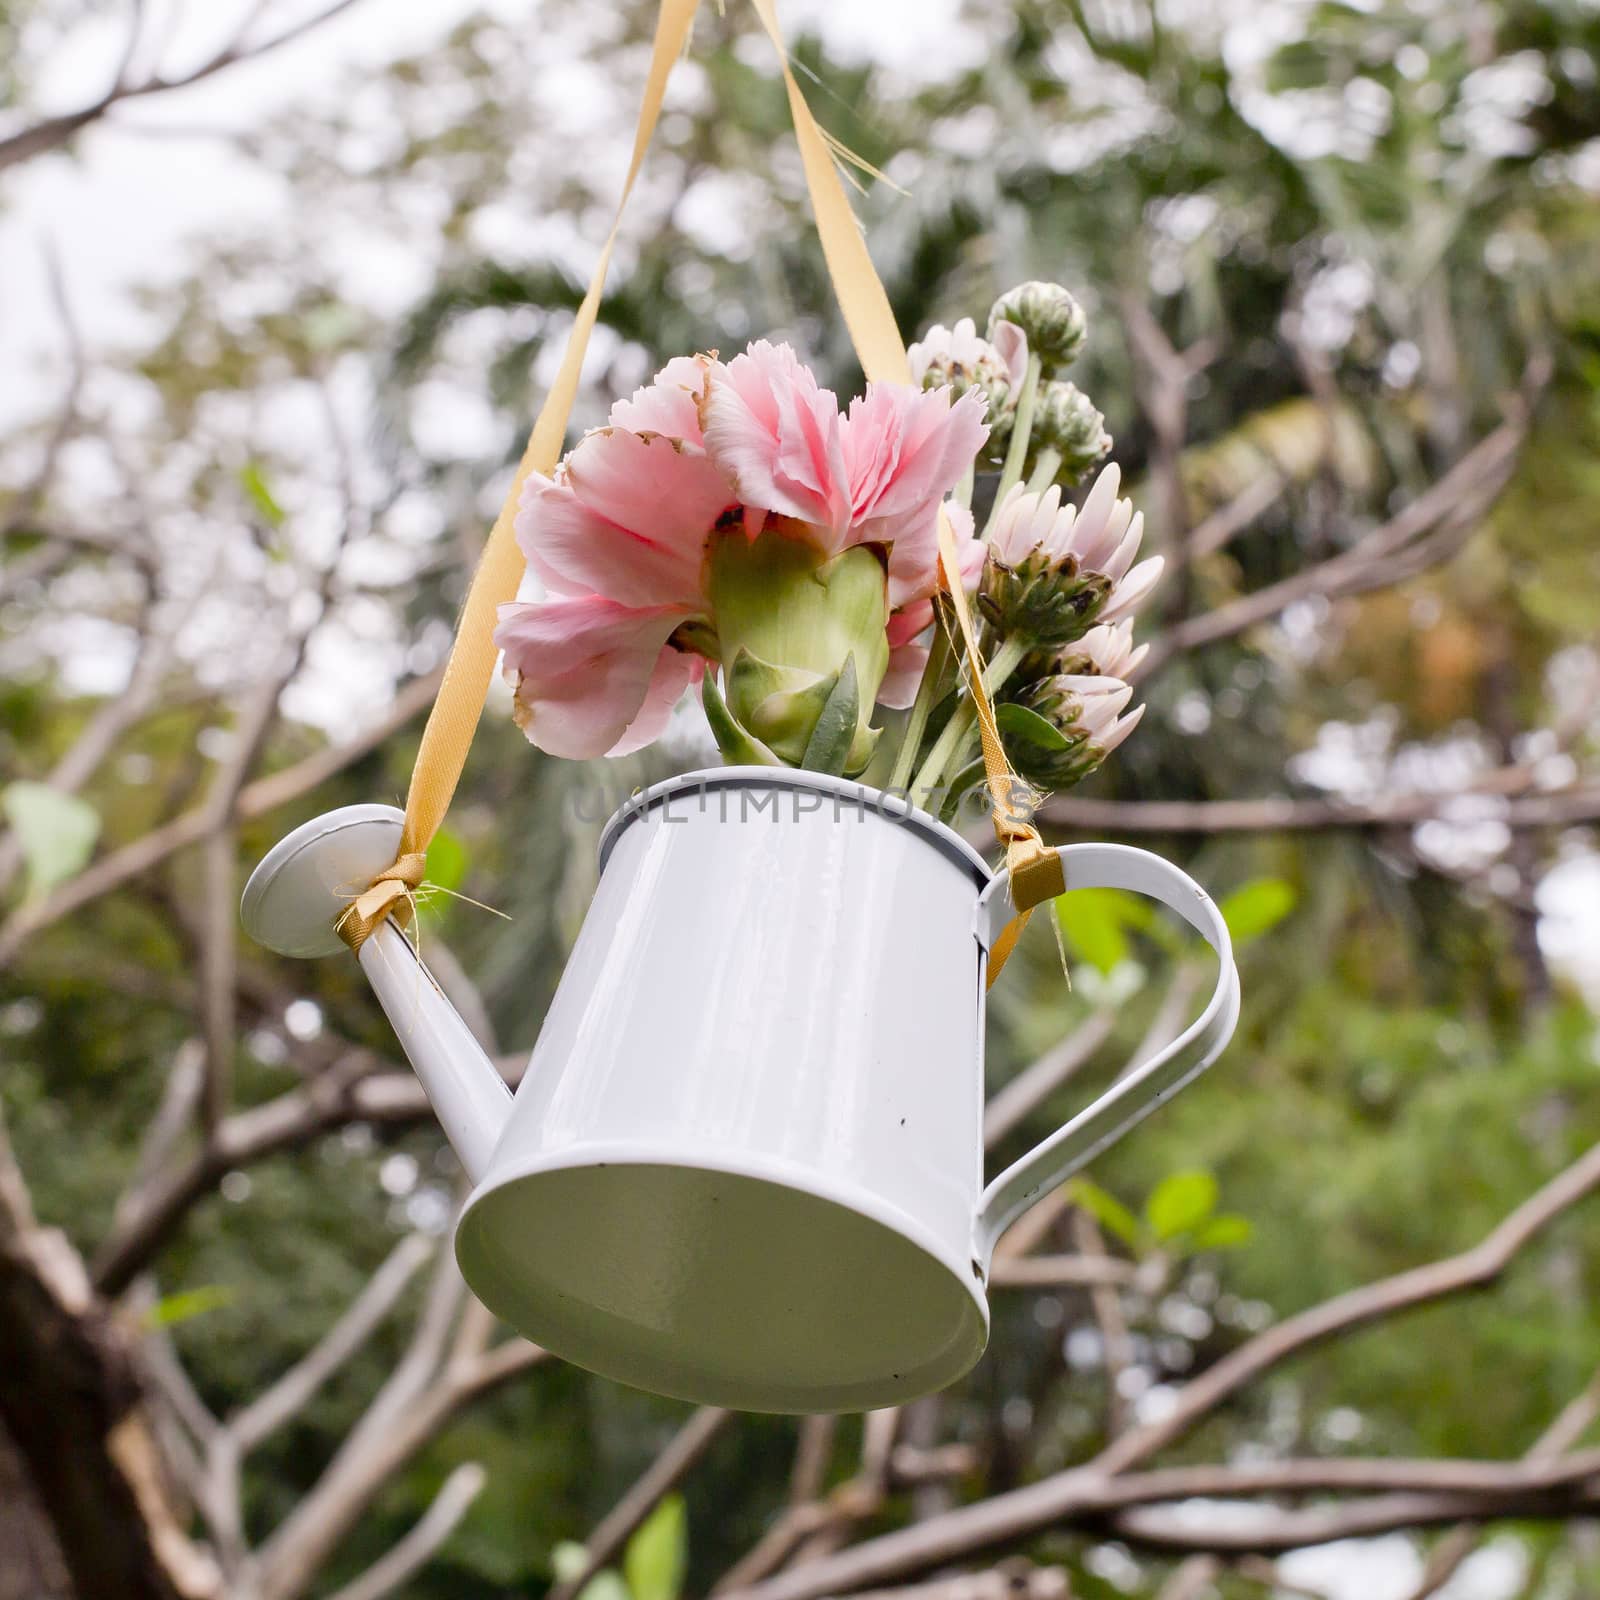 Hanging of flowers and watering can decorate in garden by art9858